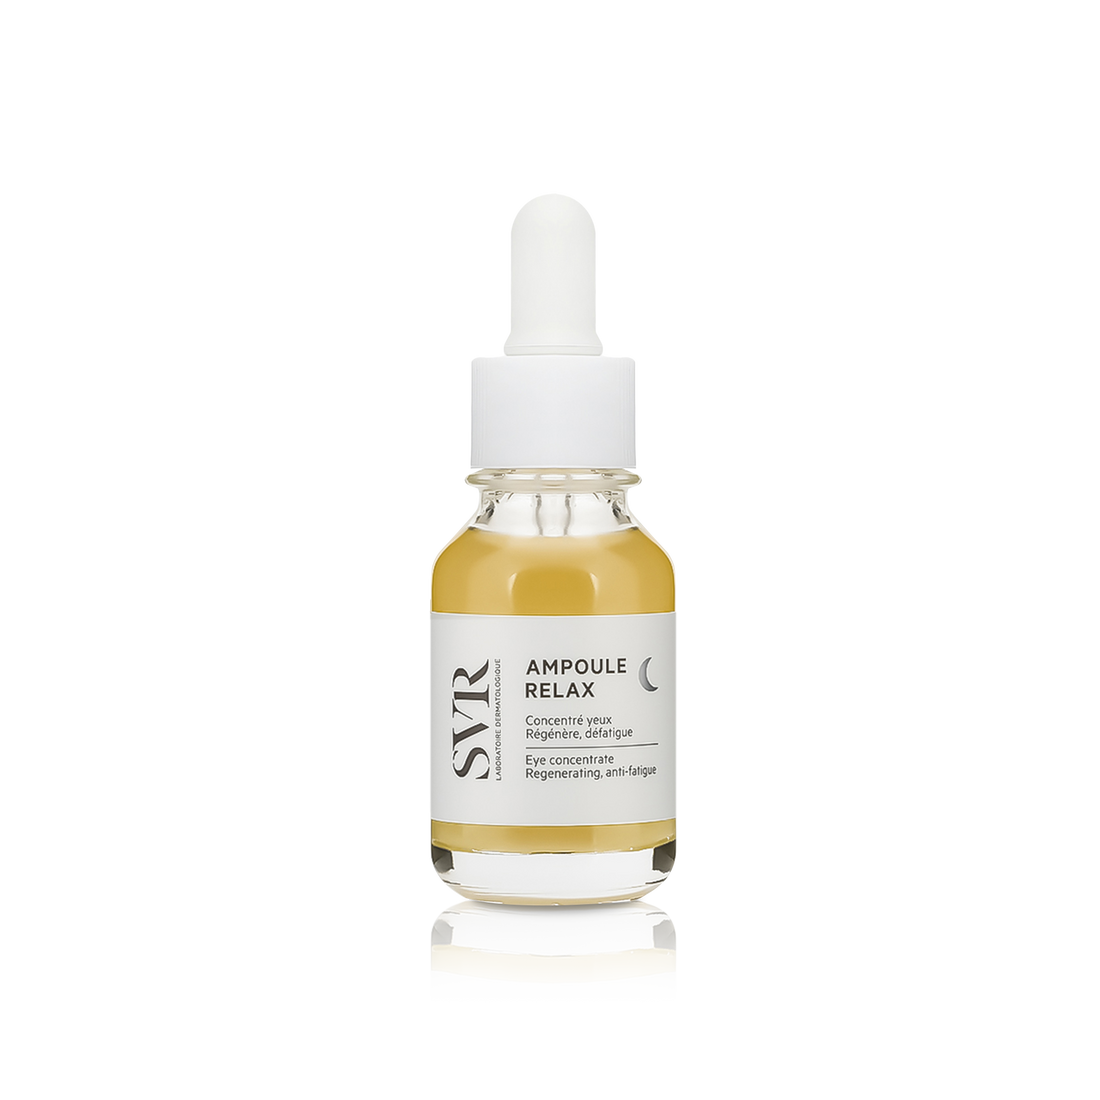 Ampoule Relax Eye Concentrate